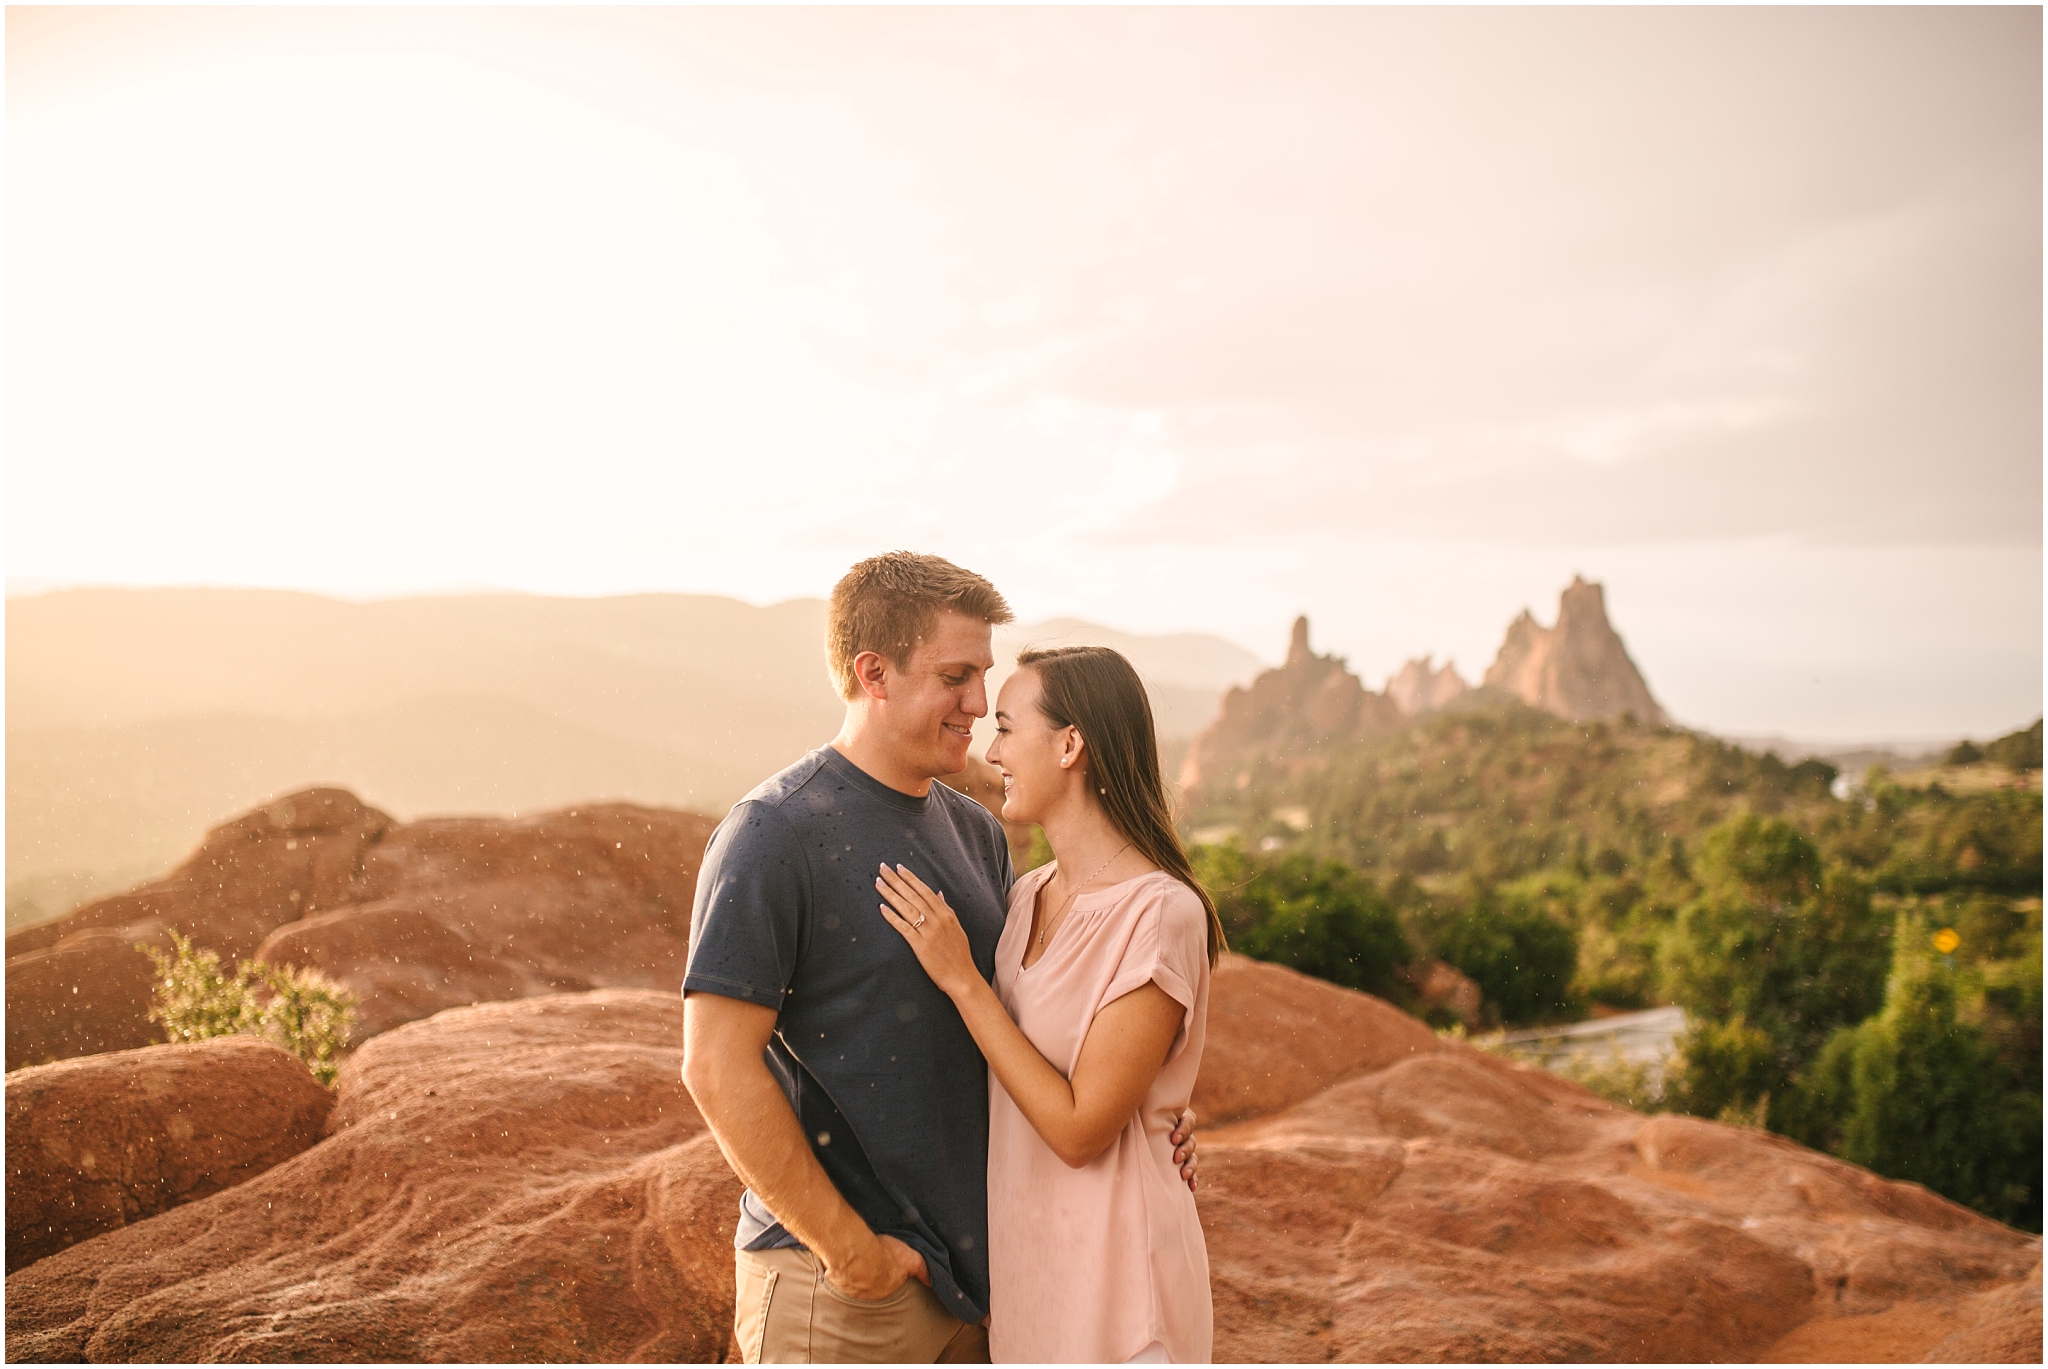 Garden of the Gods - Favorite Colorado Mountain Locations for Adventurous Engagement Pictures